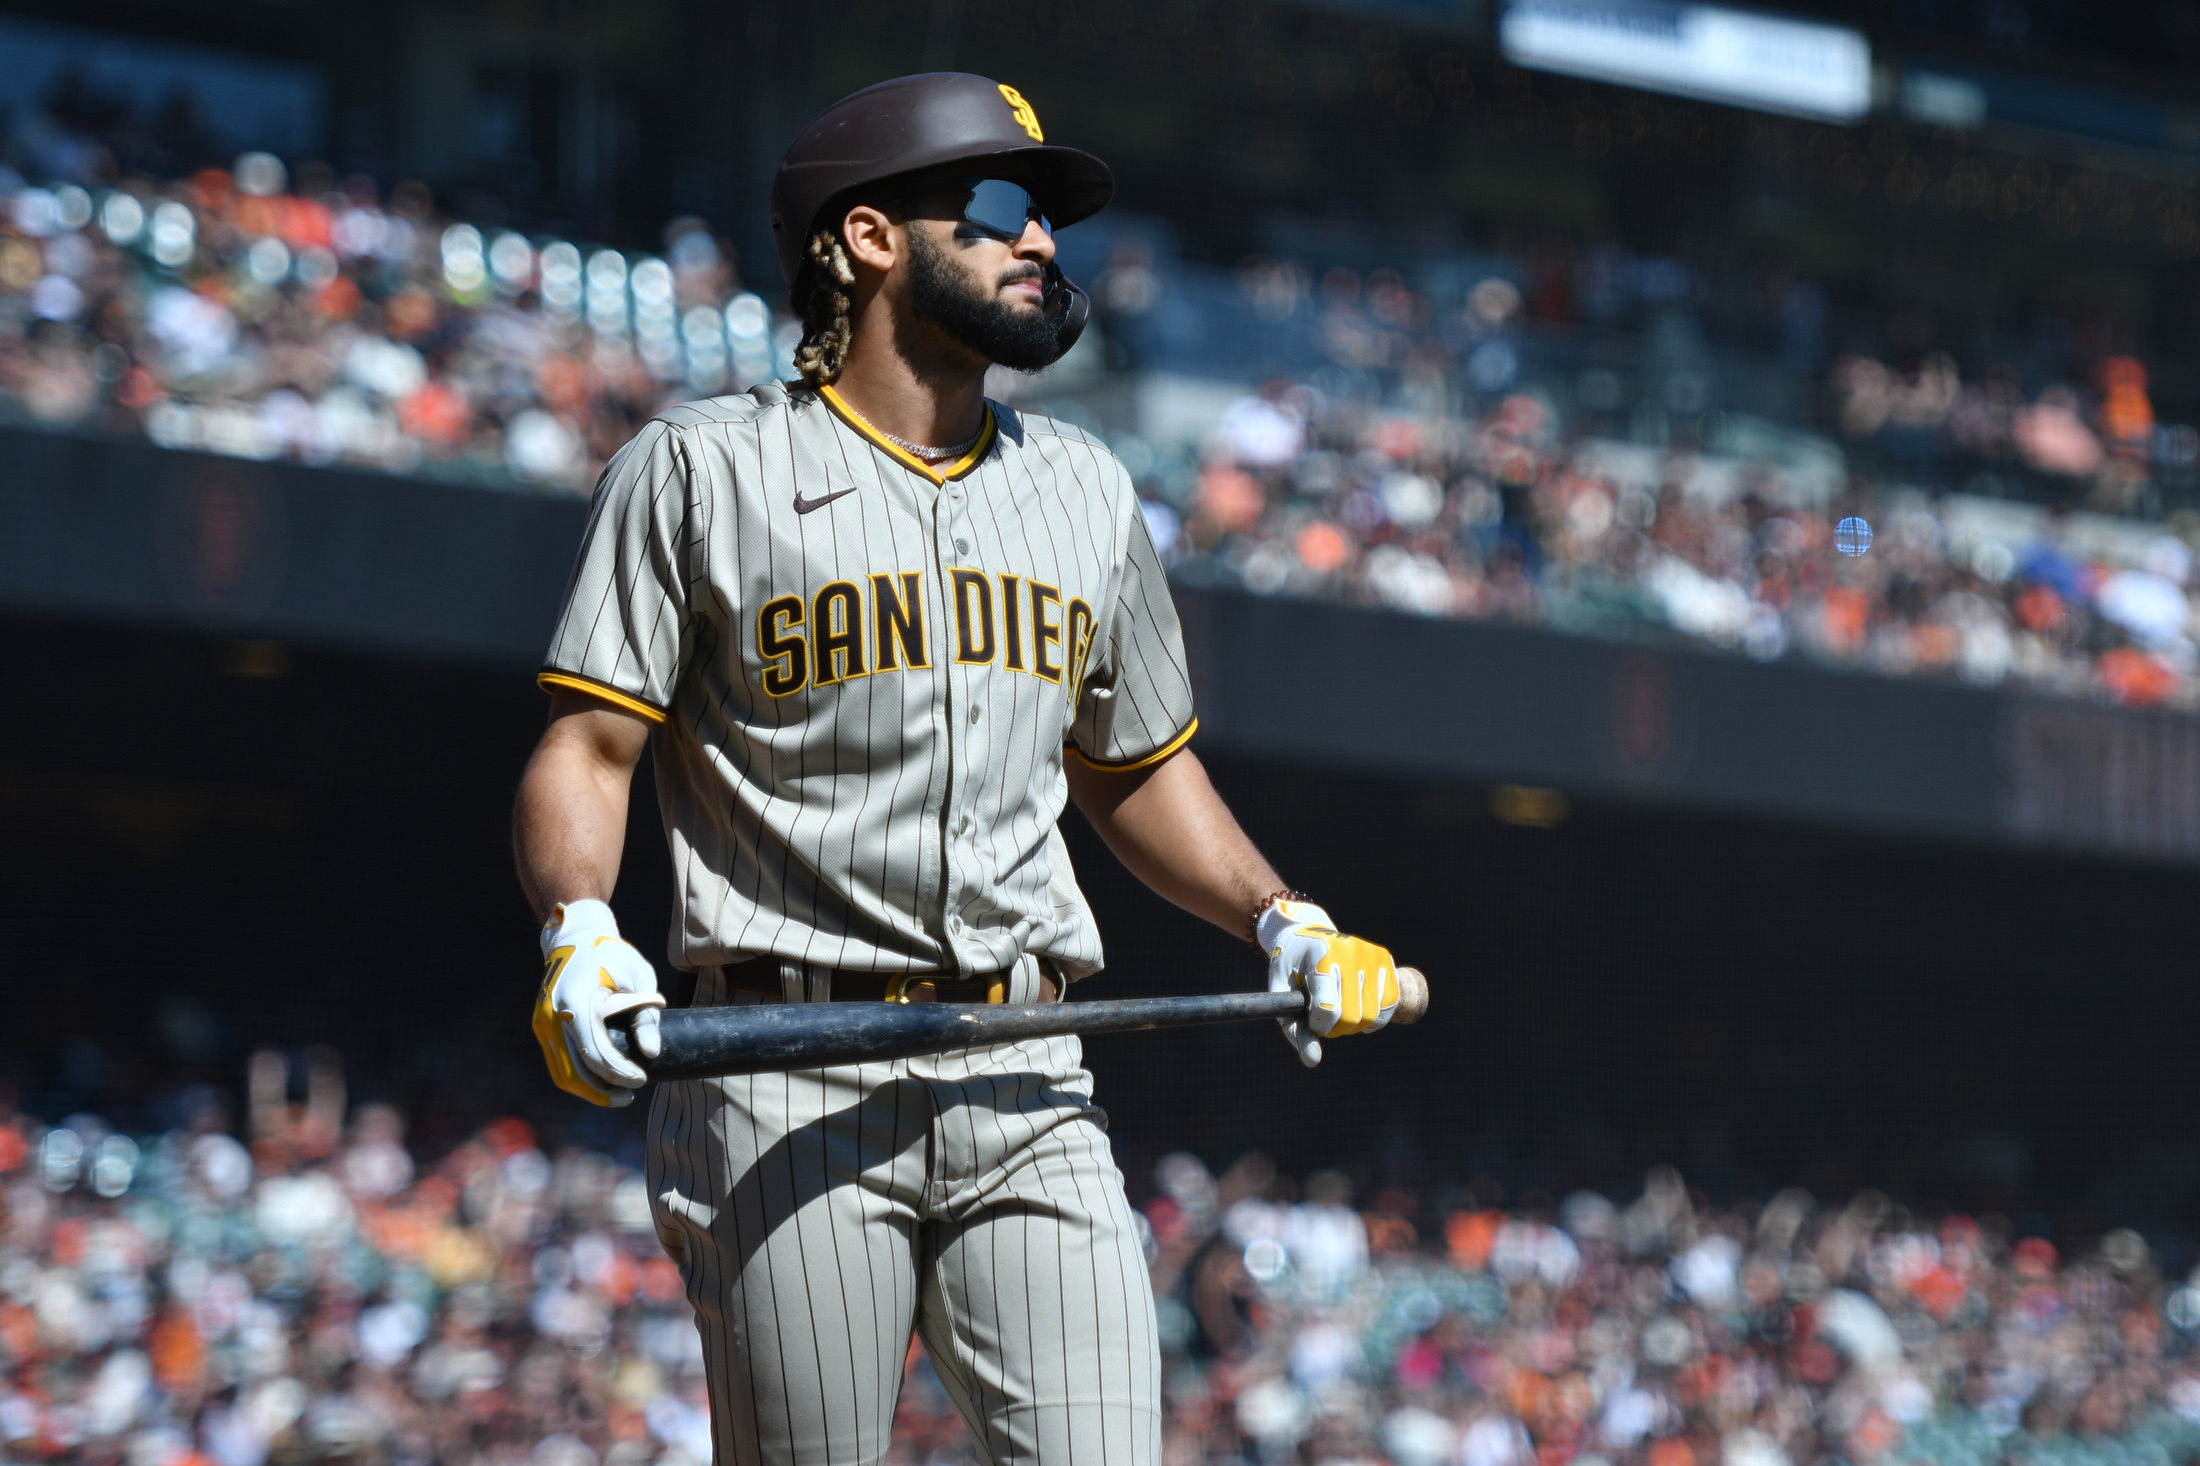 Report: Tatis Jr., Padres agree on record contract extension